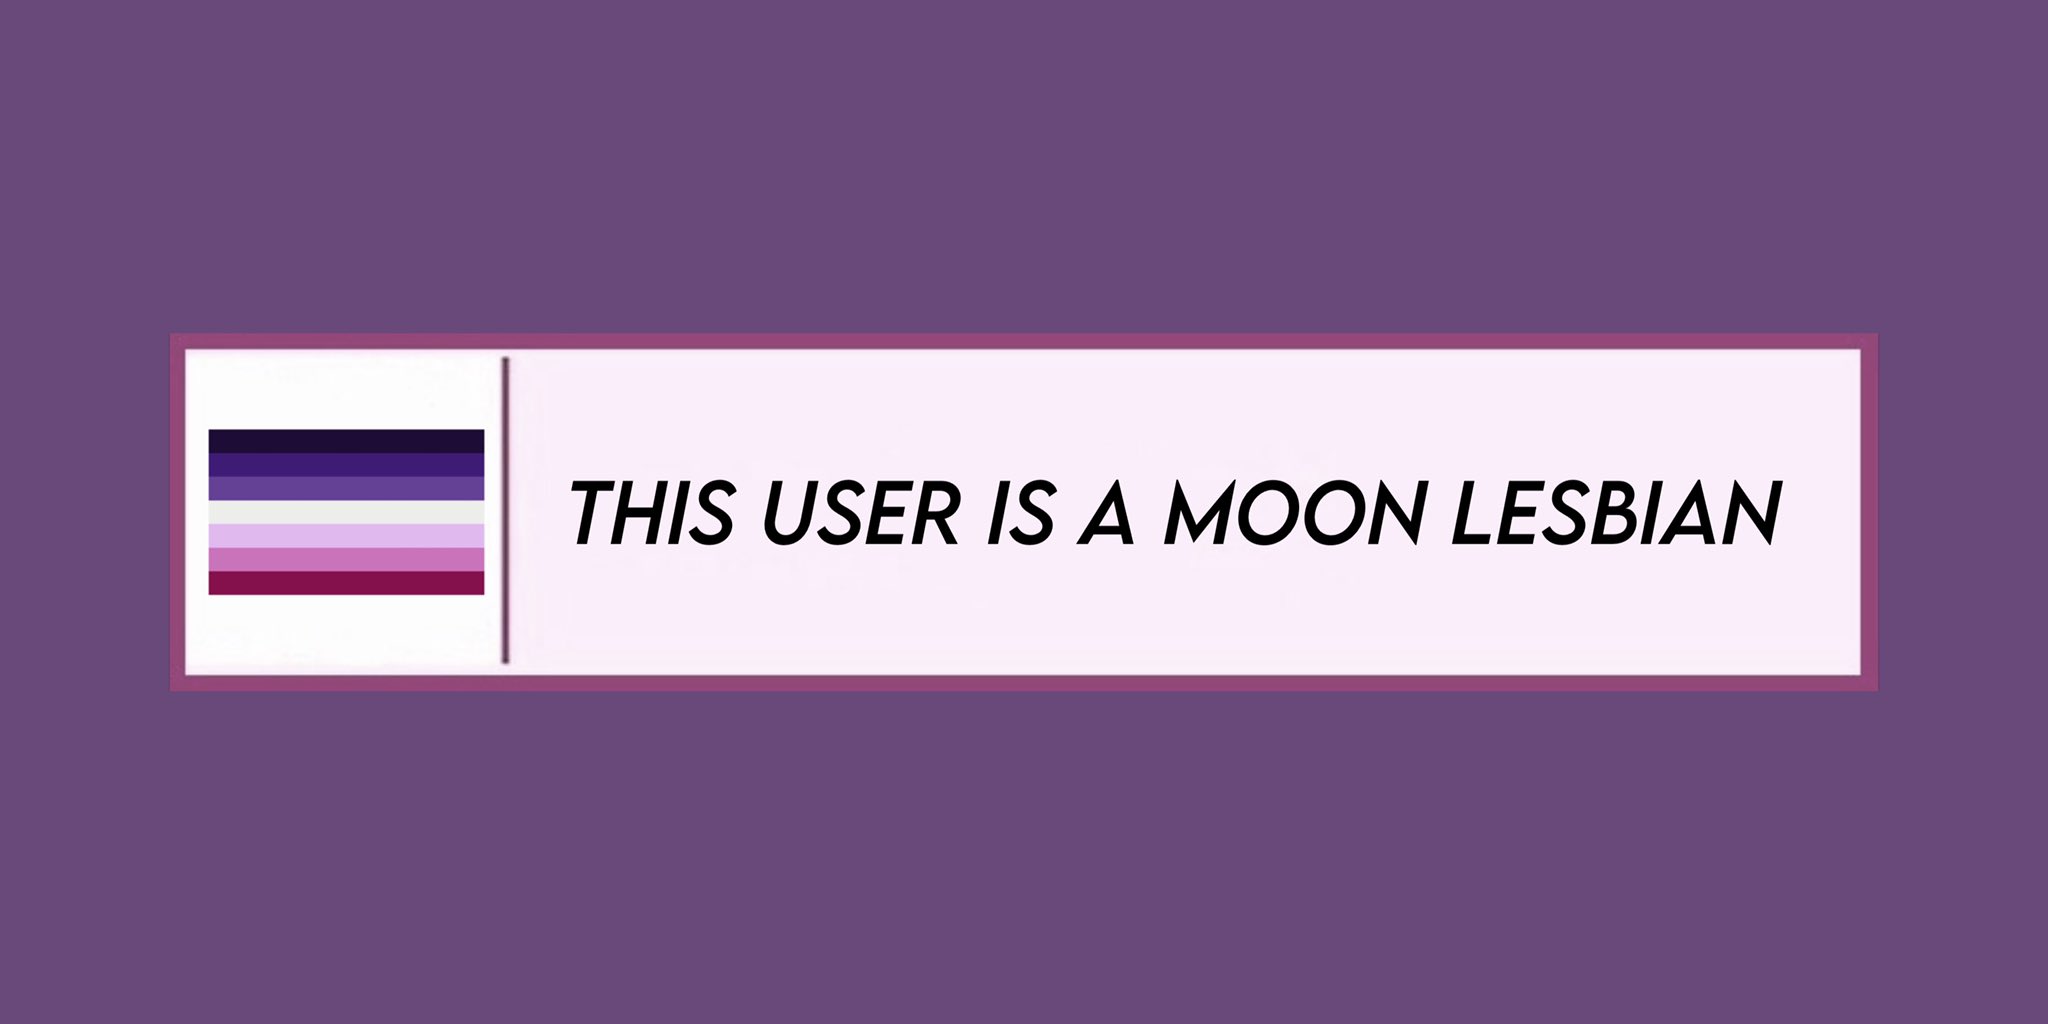 Oct 8, 2020. this user is a moon lesbian. 